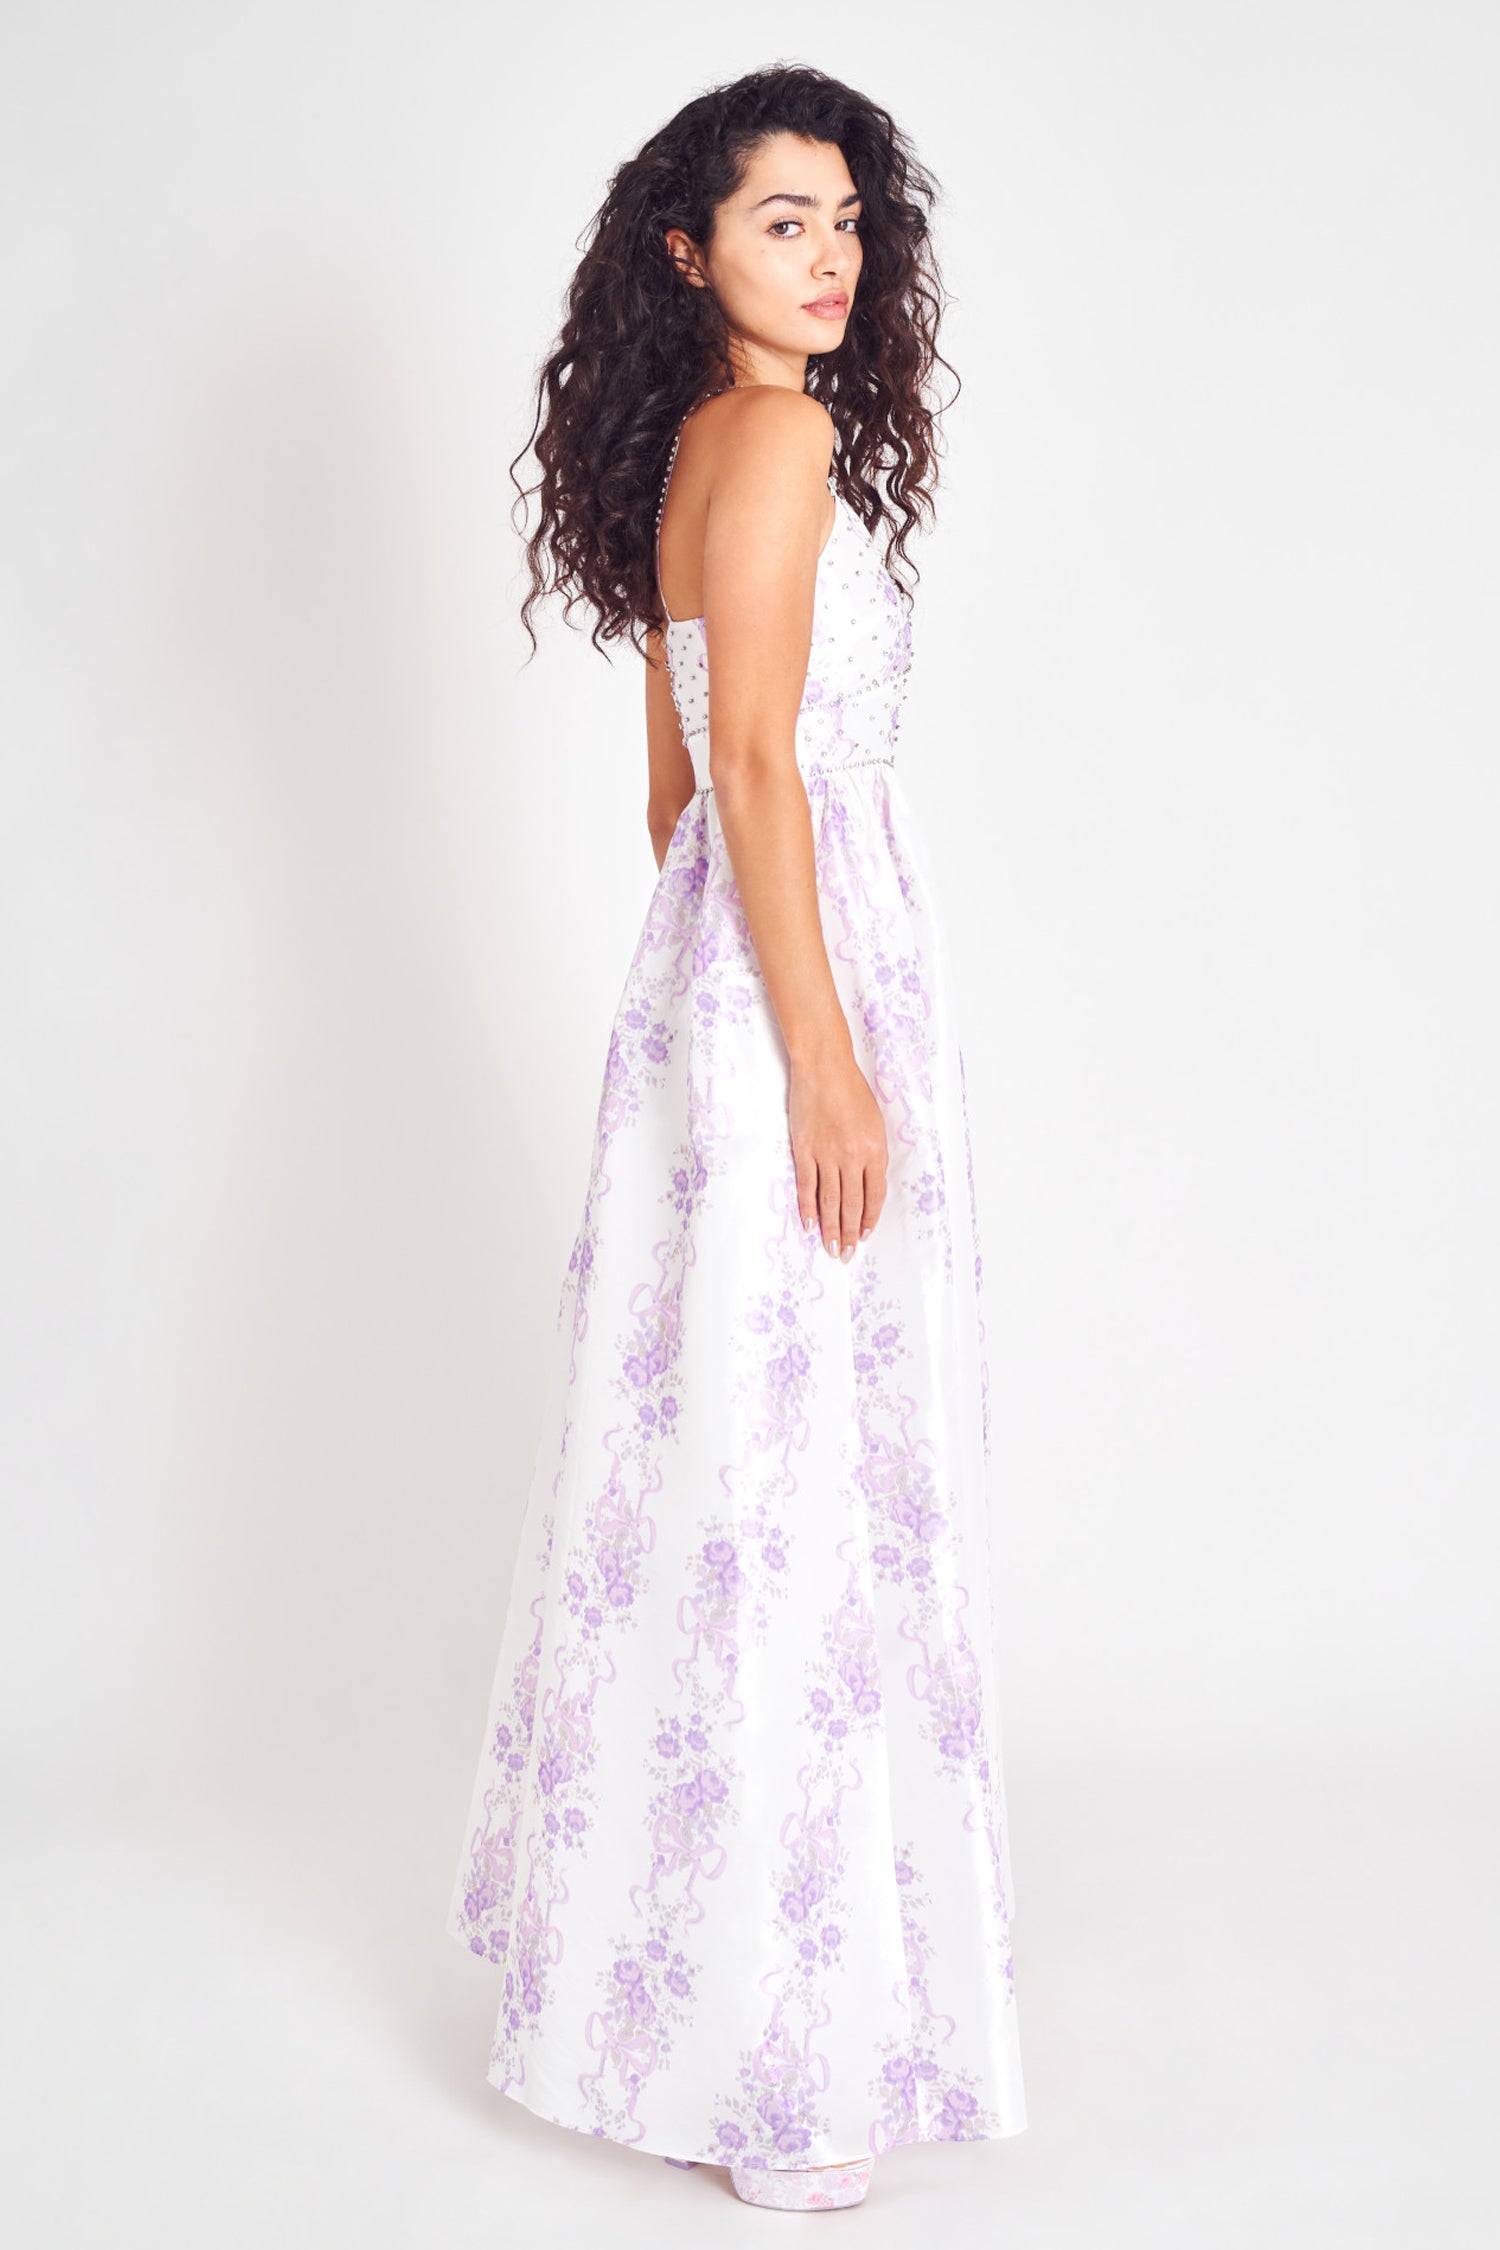 Lilac floral maxi dress with fitted waist and spaghetti straps.